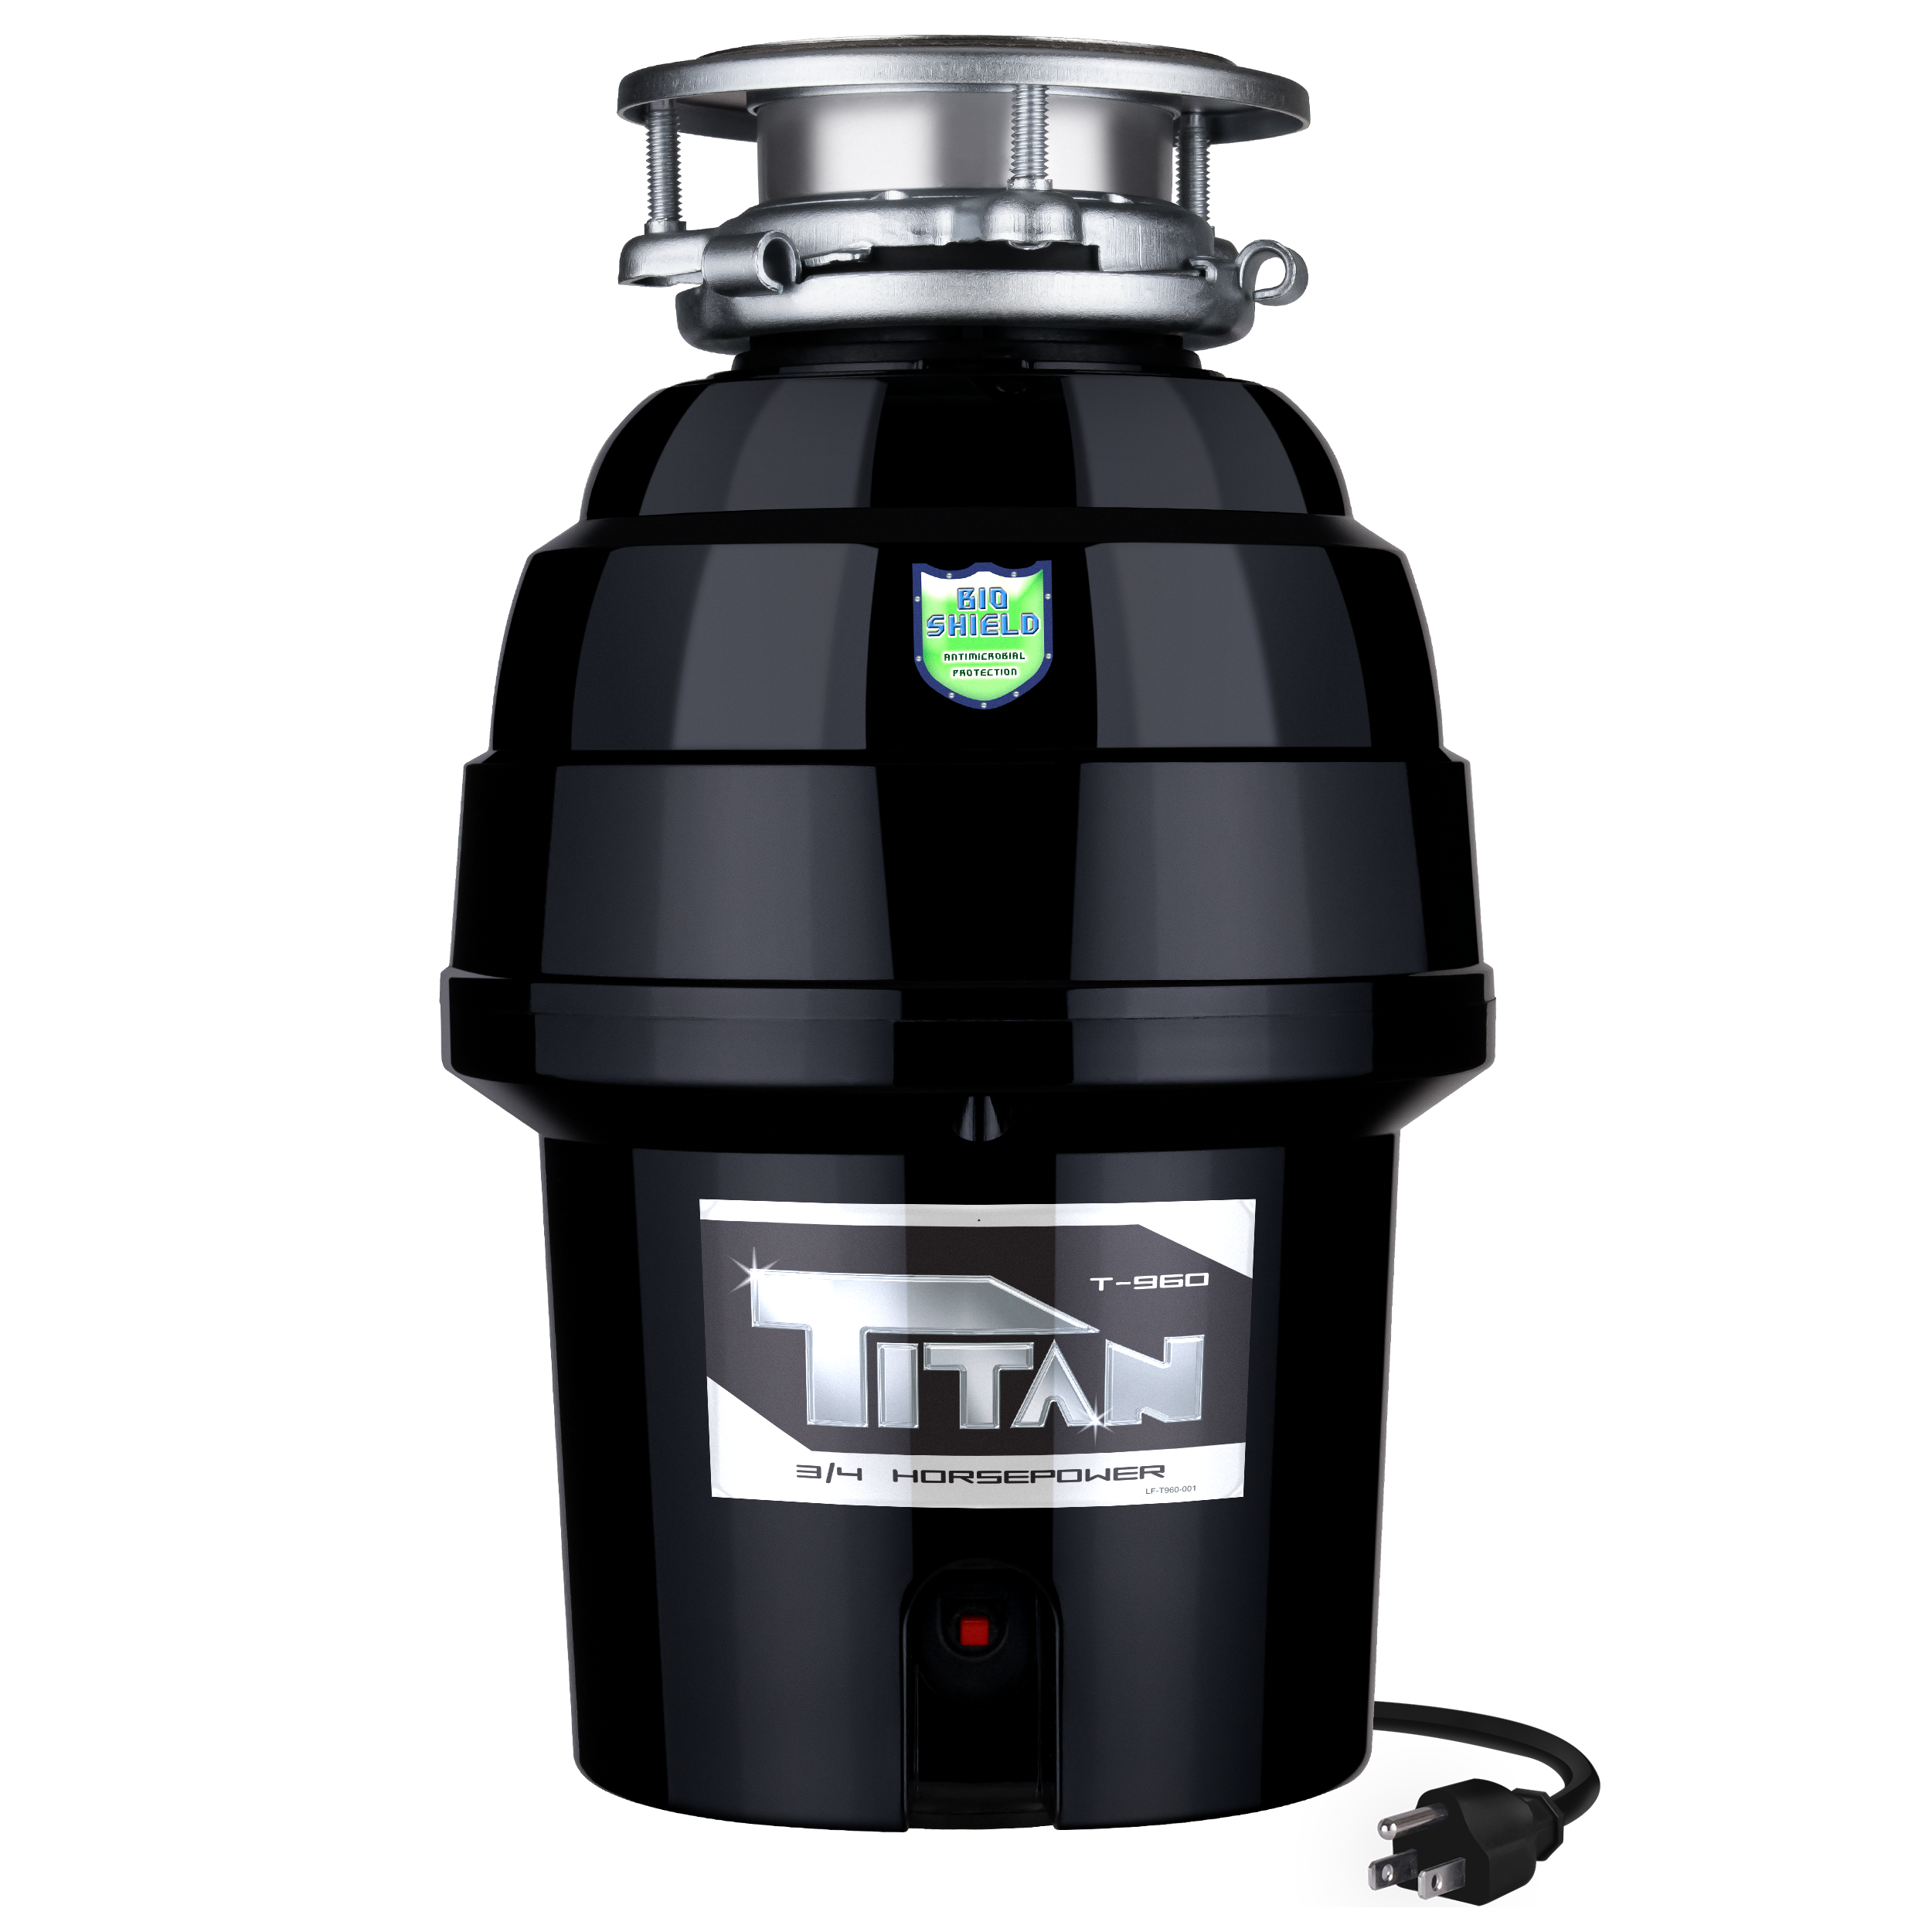 Titan 10-US-TN-T-960-3B Garbage Disposal, HP Deluxe, Black with Stainless Steel Sink Flange and Silver Guard - 1